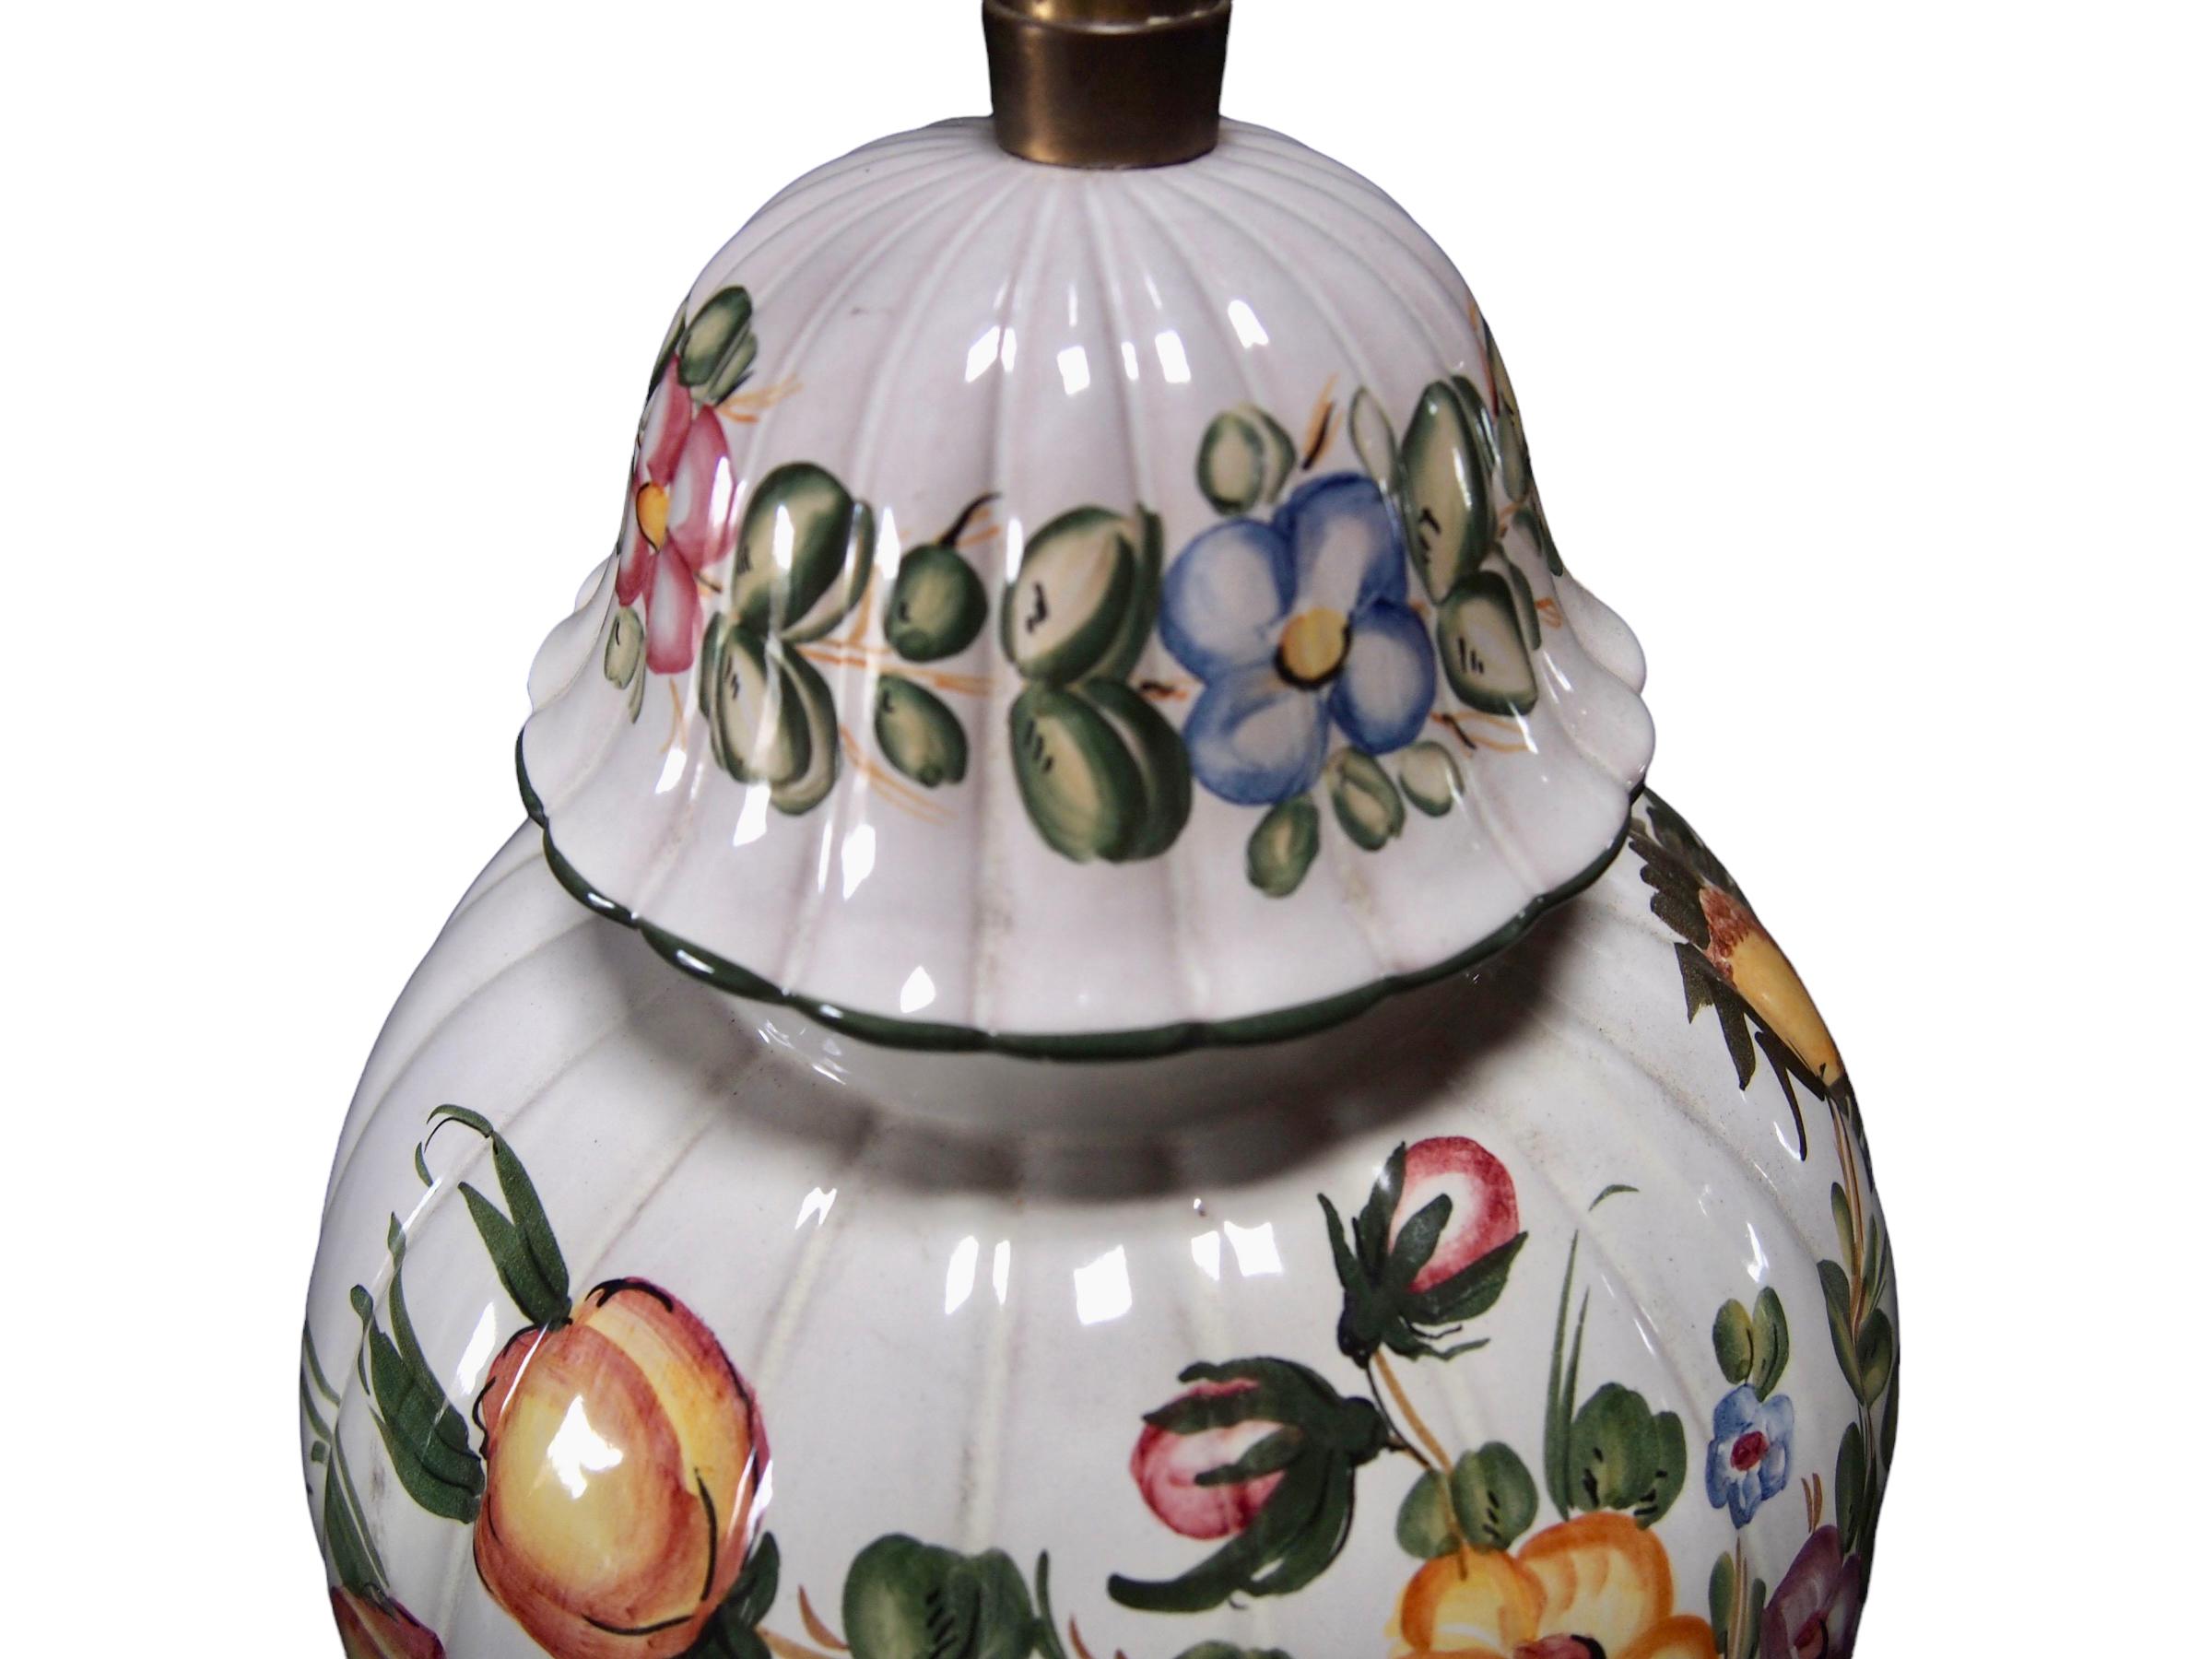 A fine and large pair of ginger jar hand-painted floral decorated lamps, made by Marbro Lamp Company Los Angeles. Each melon shaped ginger jar vase hand painted with brilliantly colored floral decoration resting on a wood base. Wired and in working